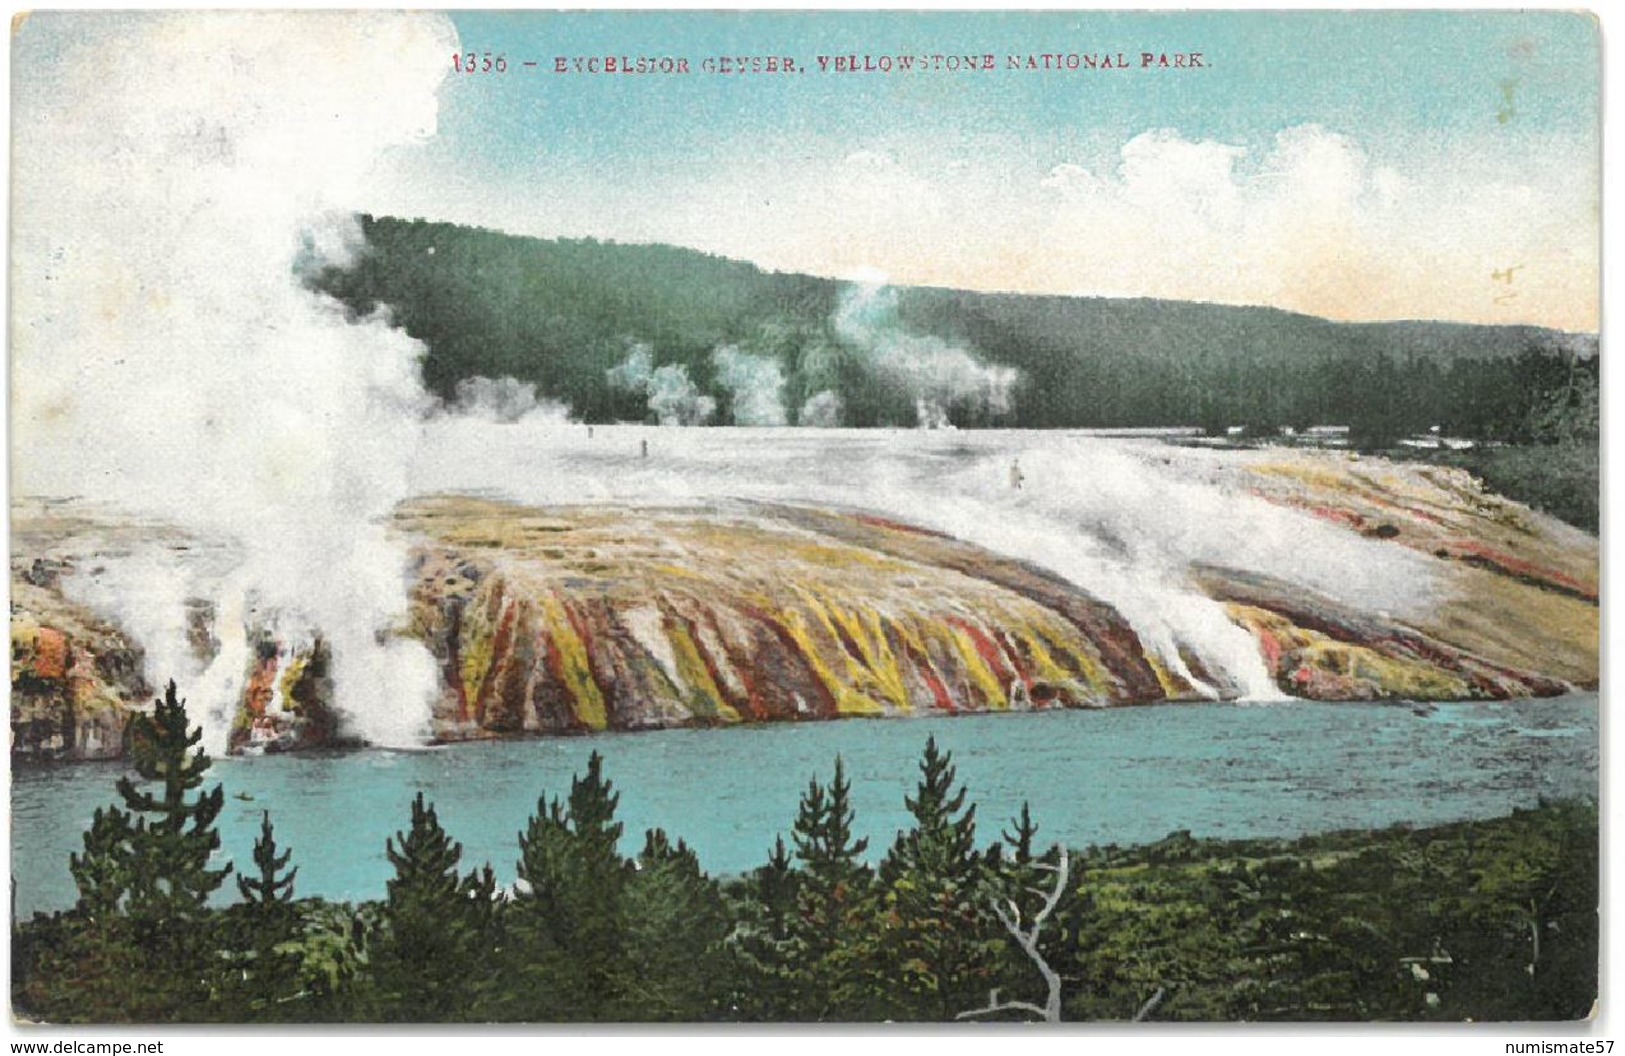 CPA YELLOWSTONE National Park - Excelsior Geyser - Yellowstone